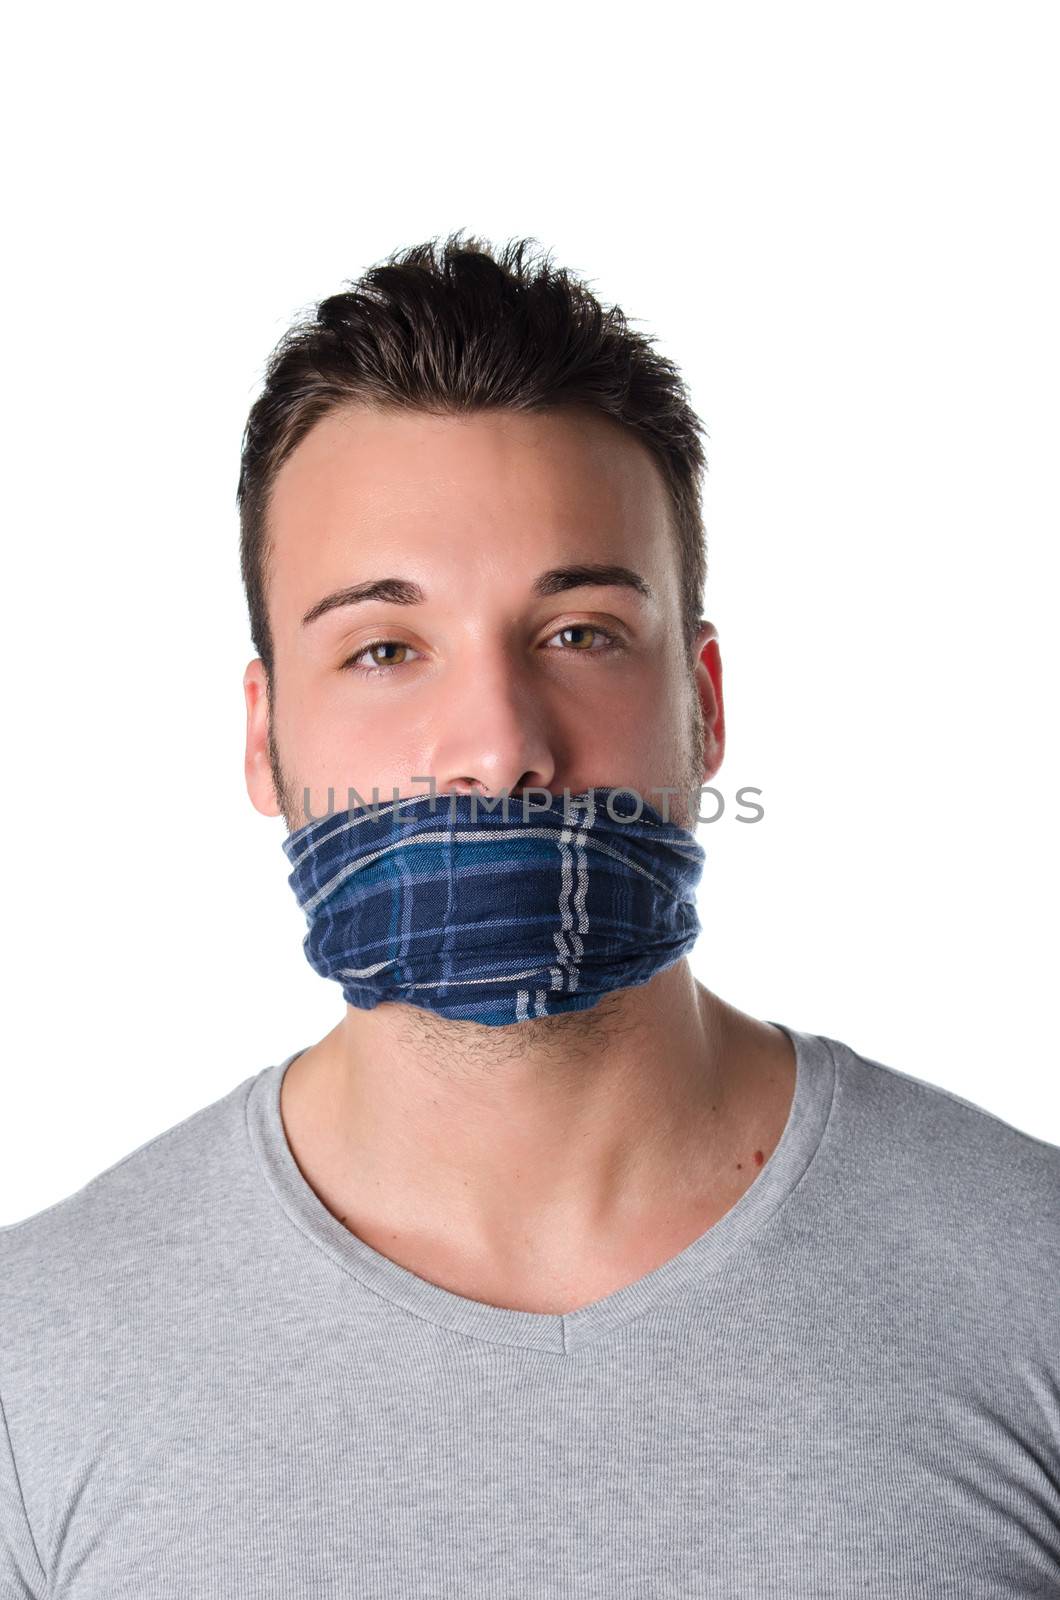 Gagged young man cannot speak by artofphoto